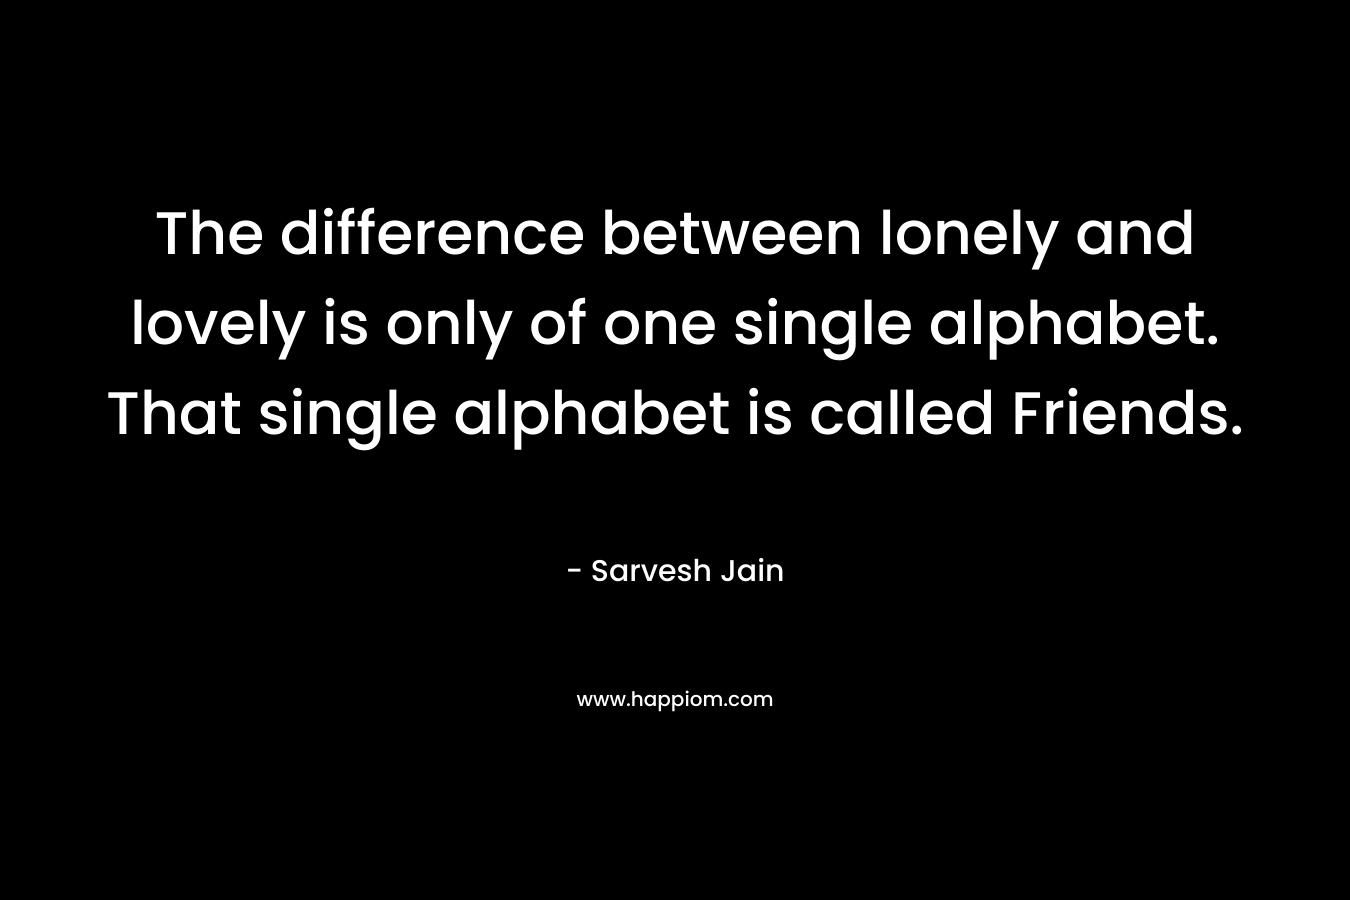 The difference between lonely and lovely is only of one single alphabet. That single alphabet is called Friends.